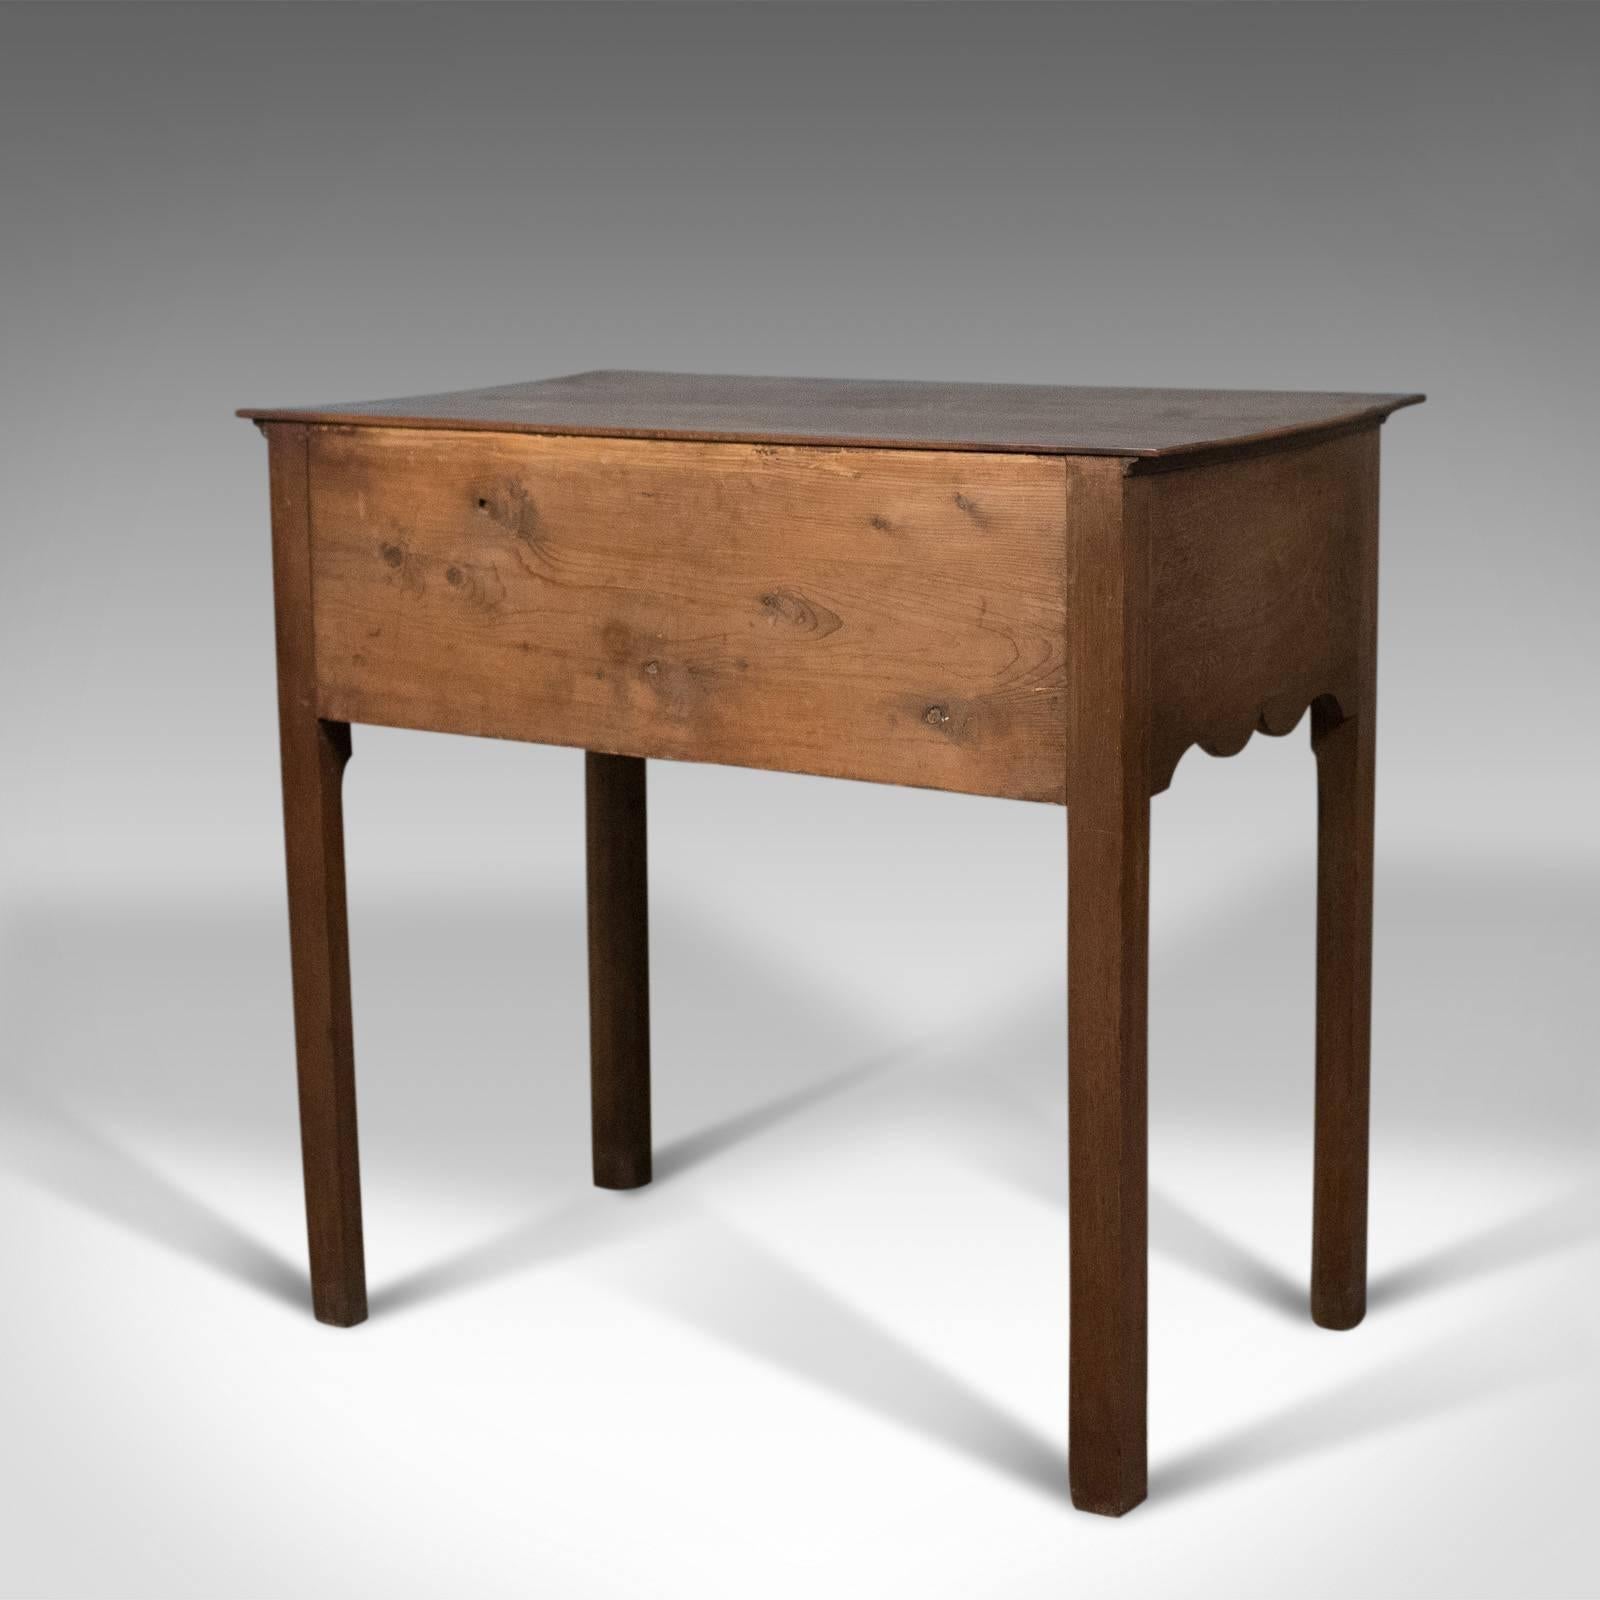 20th Century Antique Lowboy, Mahogany, English, Victorian Side Table, circa 1900 For Sale